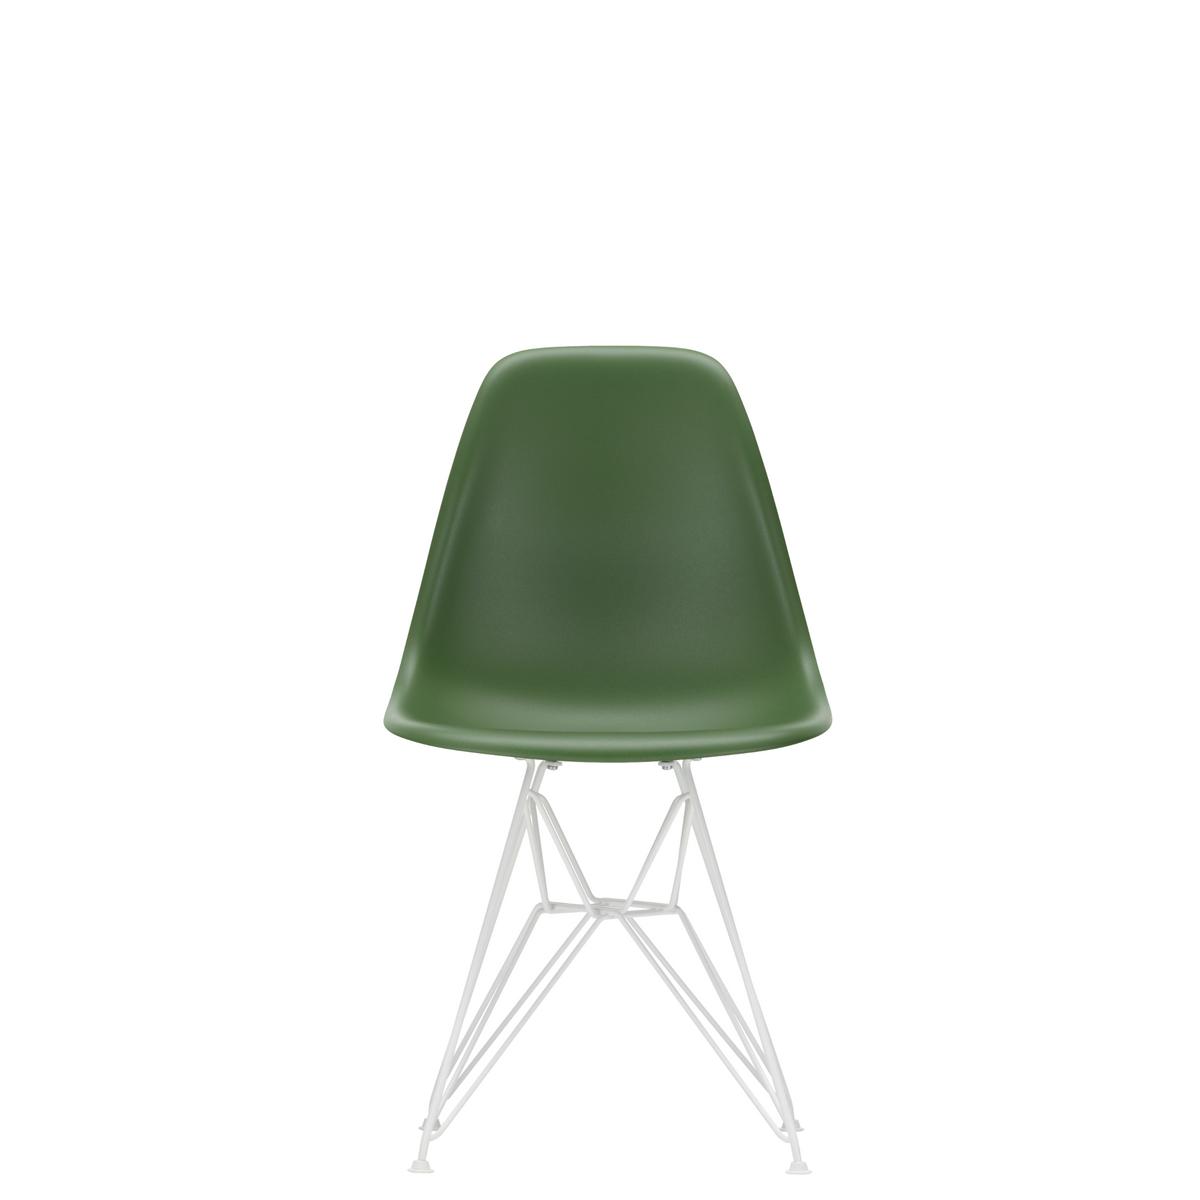 Vitra Eames Plastic Side Chair DSR Powder Coated for Outdoor Use. Forest Green Shell, White Powdercoated Base